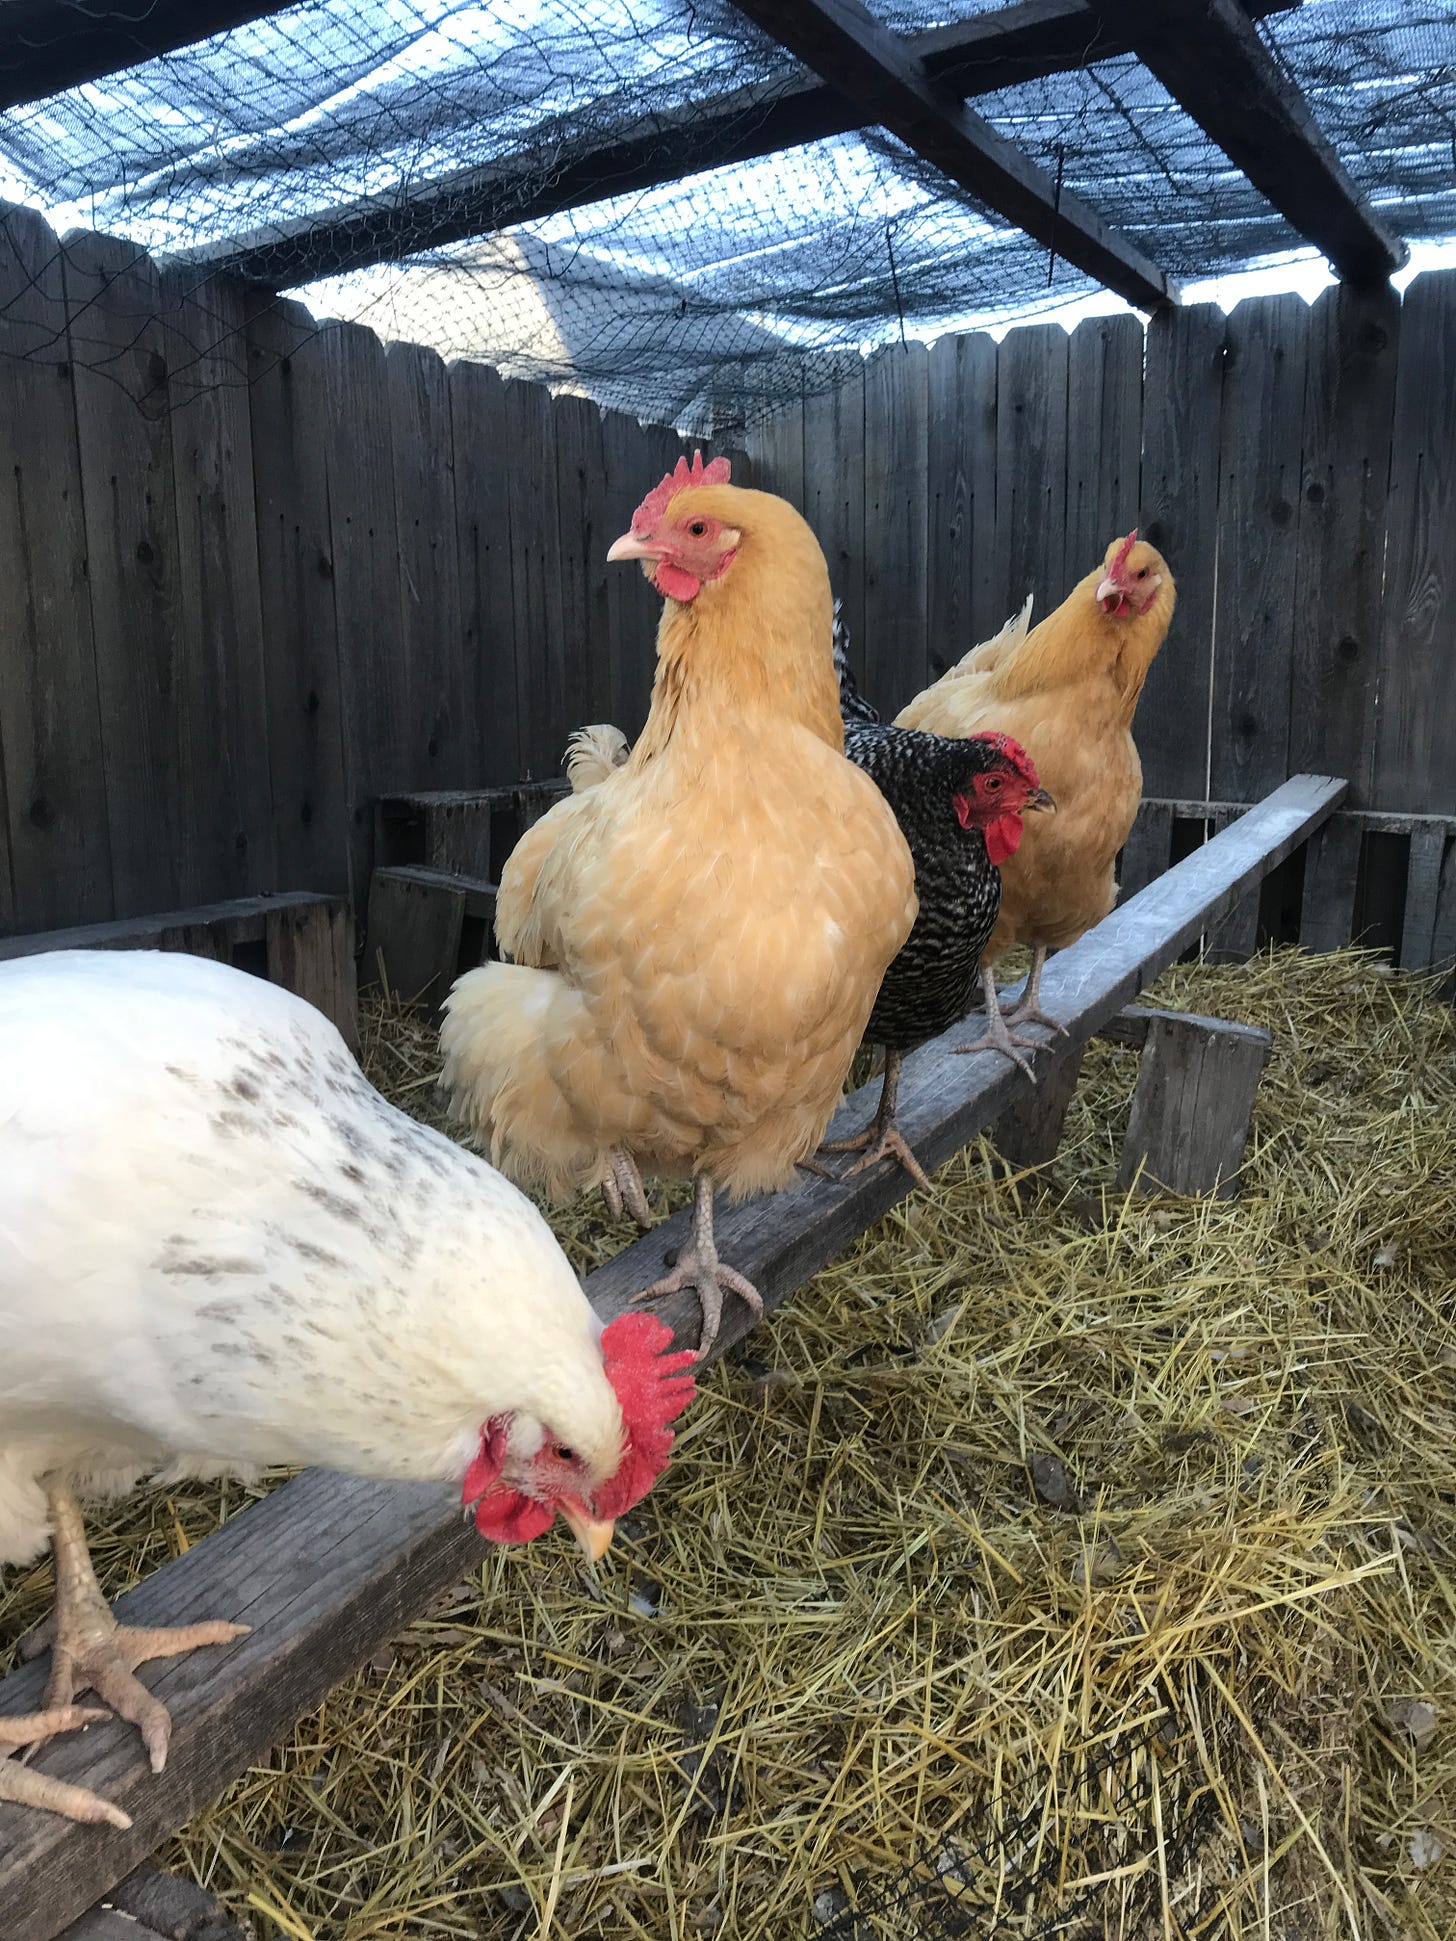 Chickens in coop, perched on a board